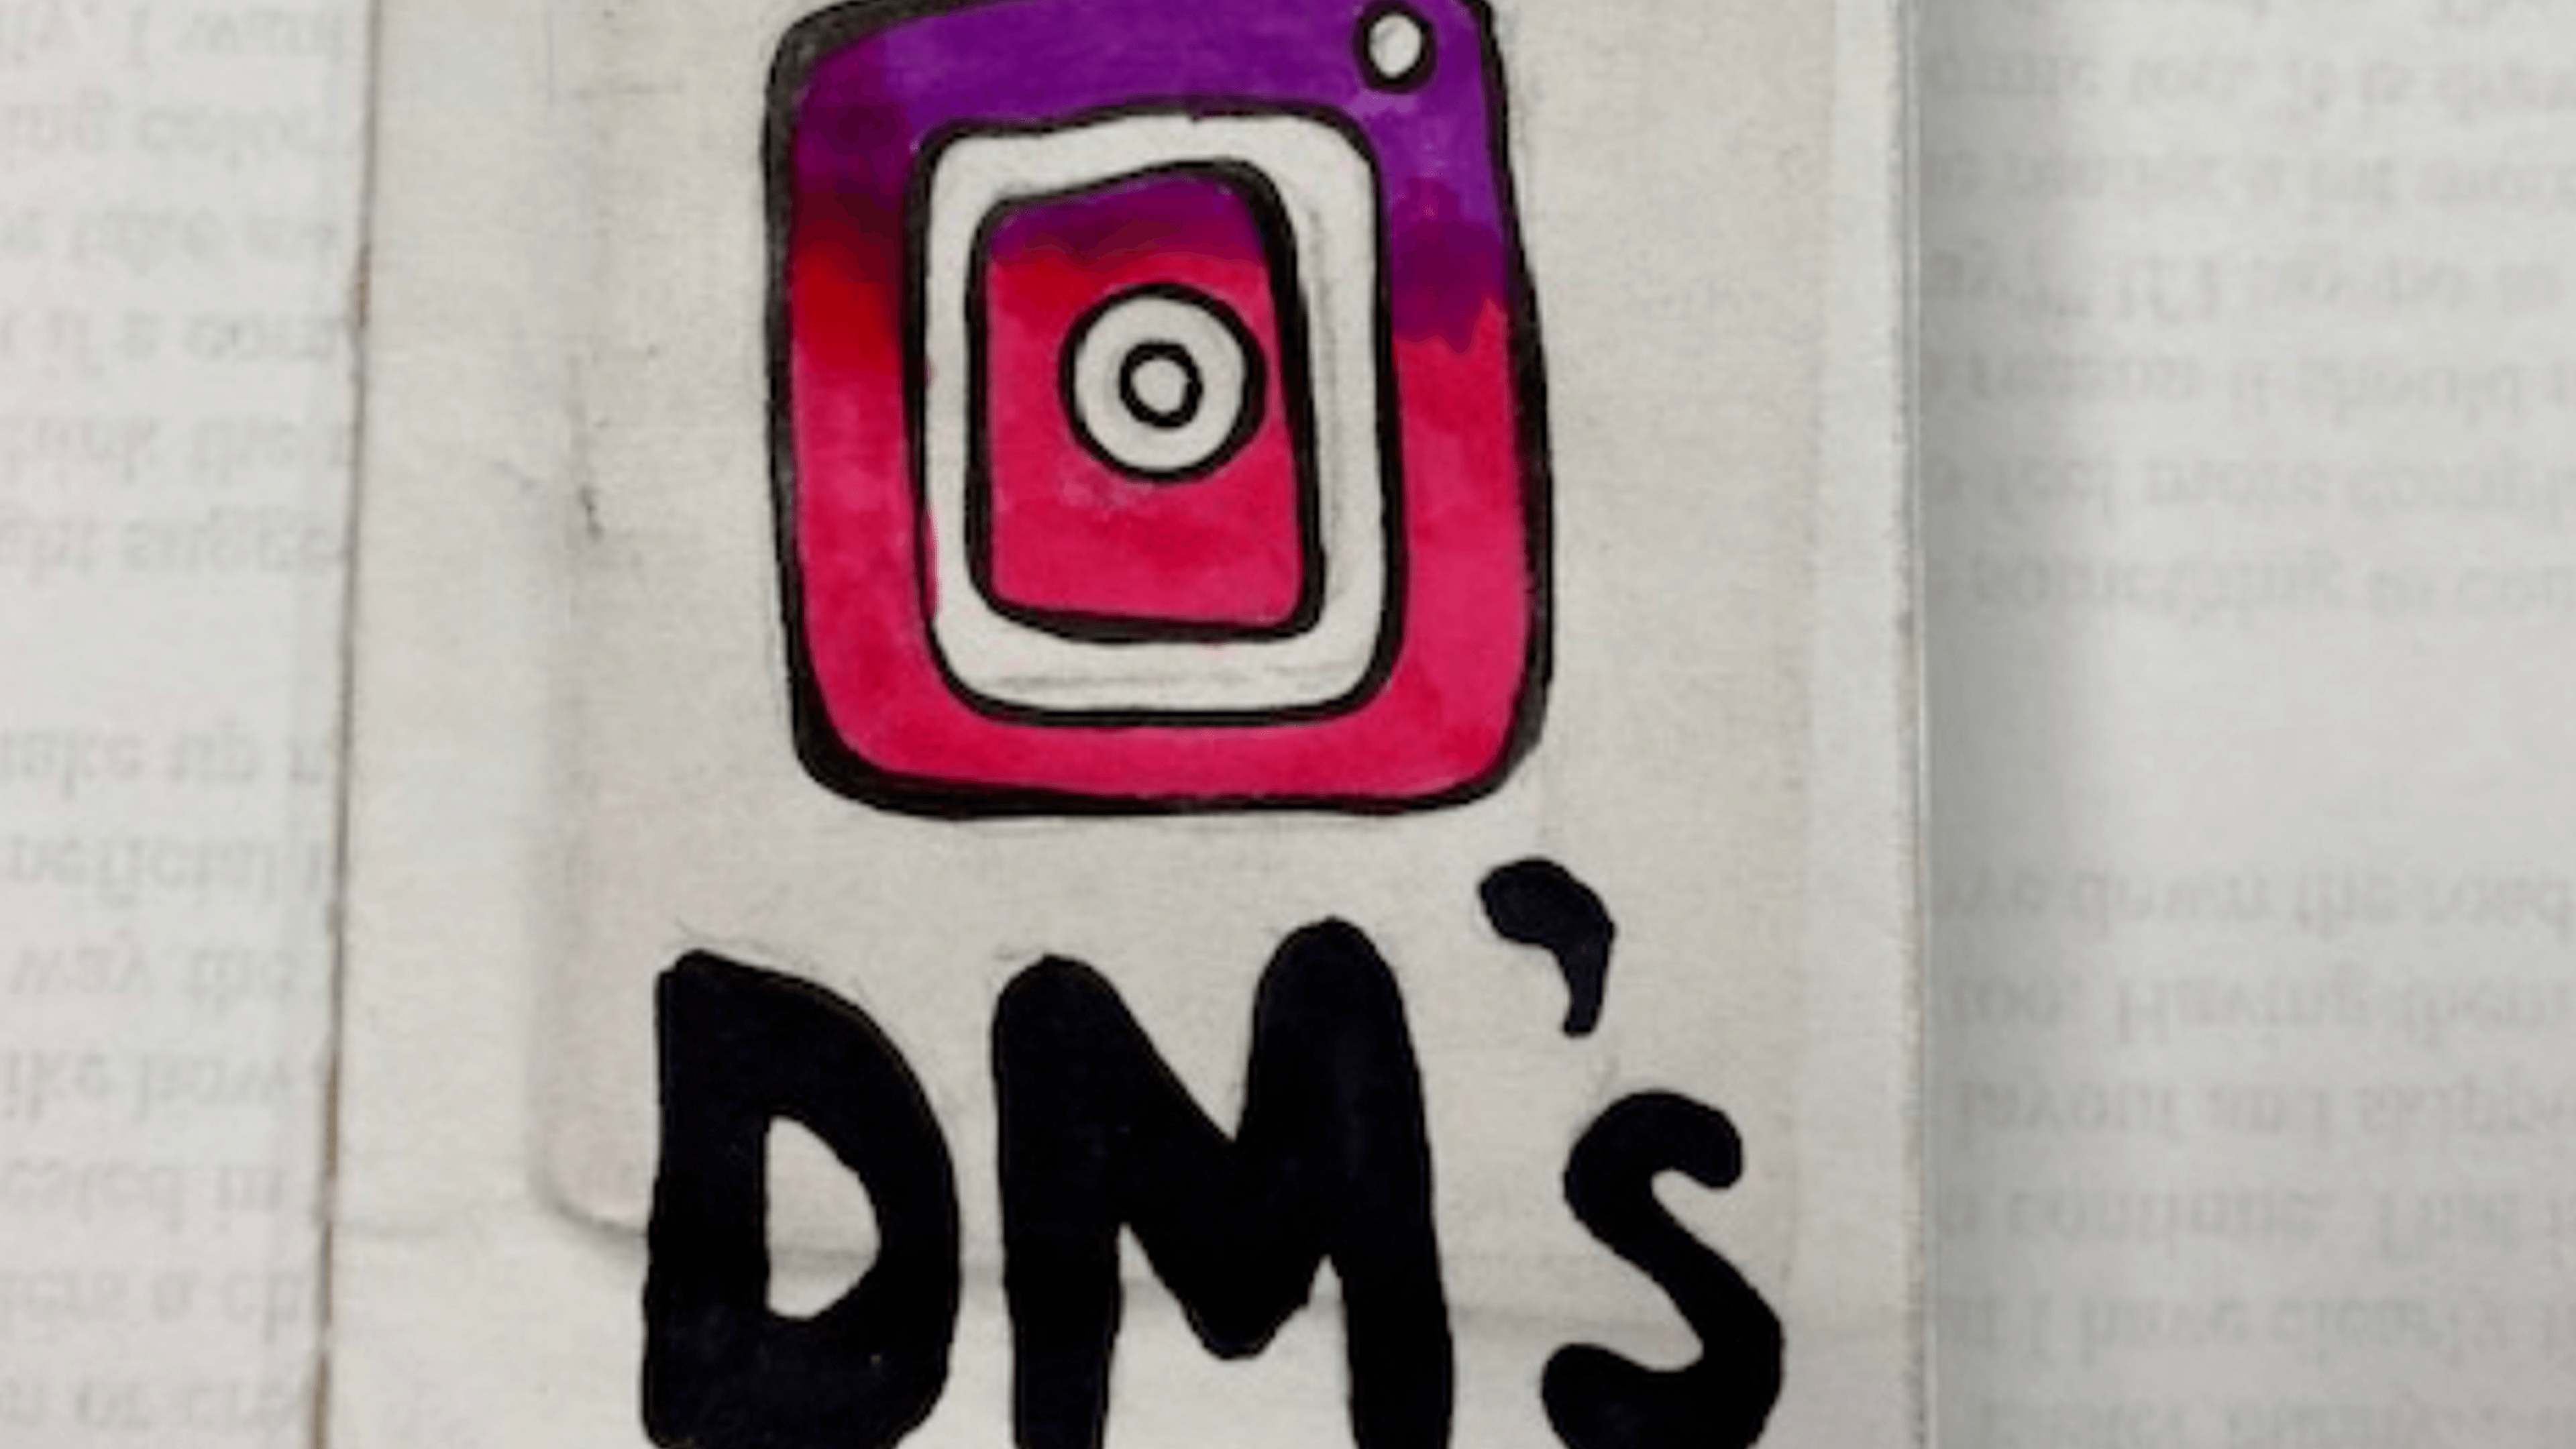 image of the cover of tony's zine, depicting the instagram logo and the text "DM's"